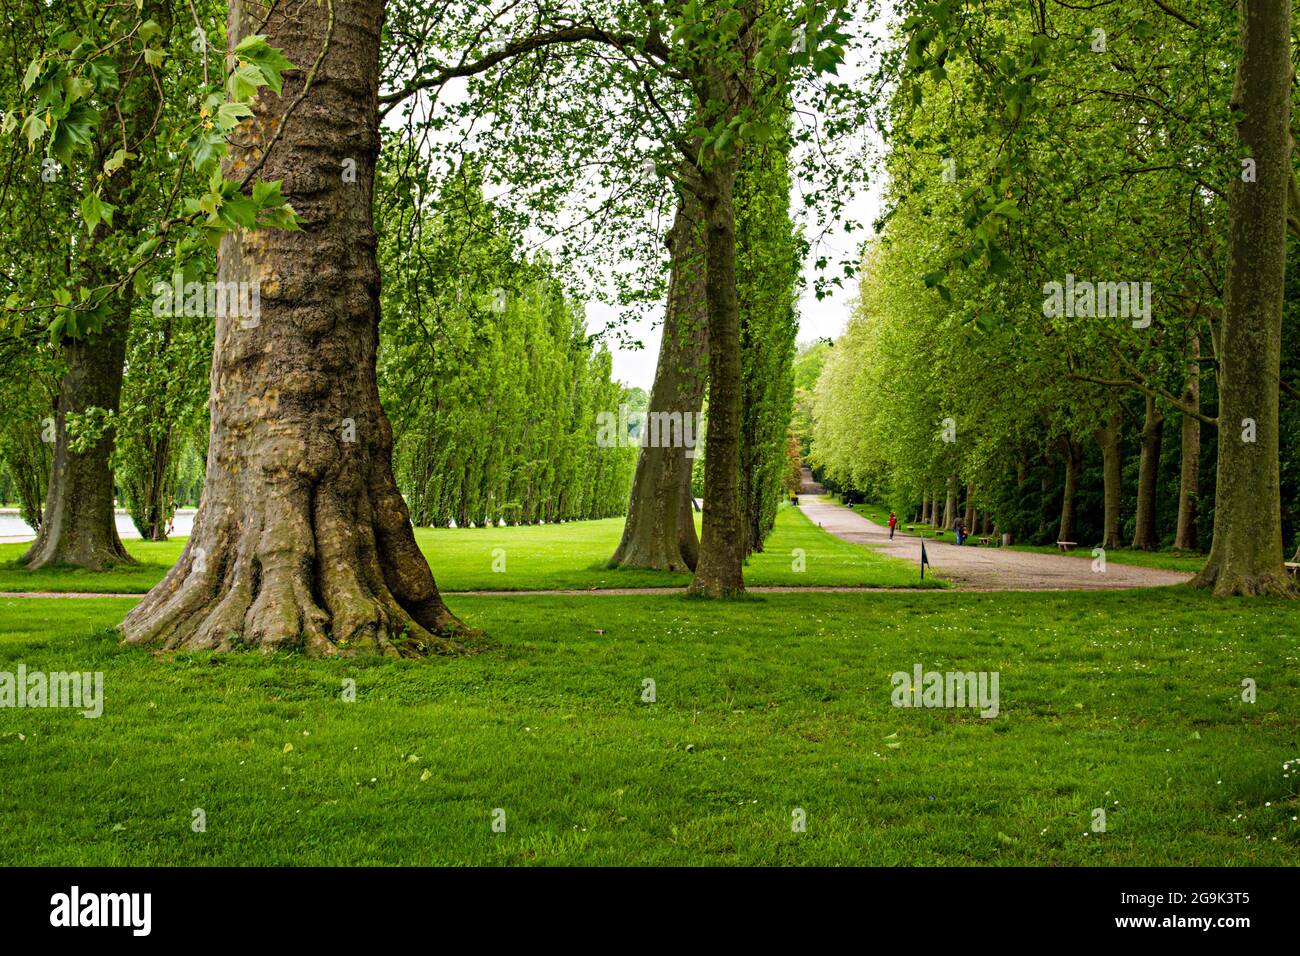 Historic gardens at Sceaux, France with lawns and tree trunks in foreground Stock Photo